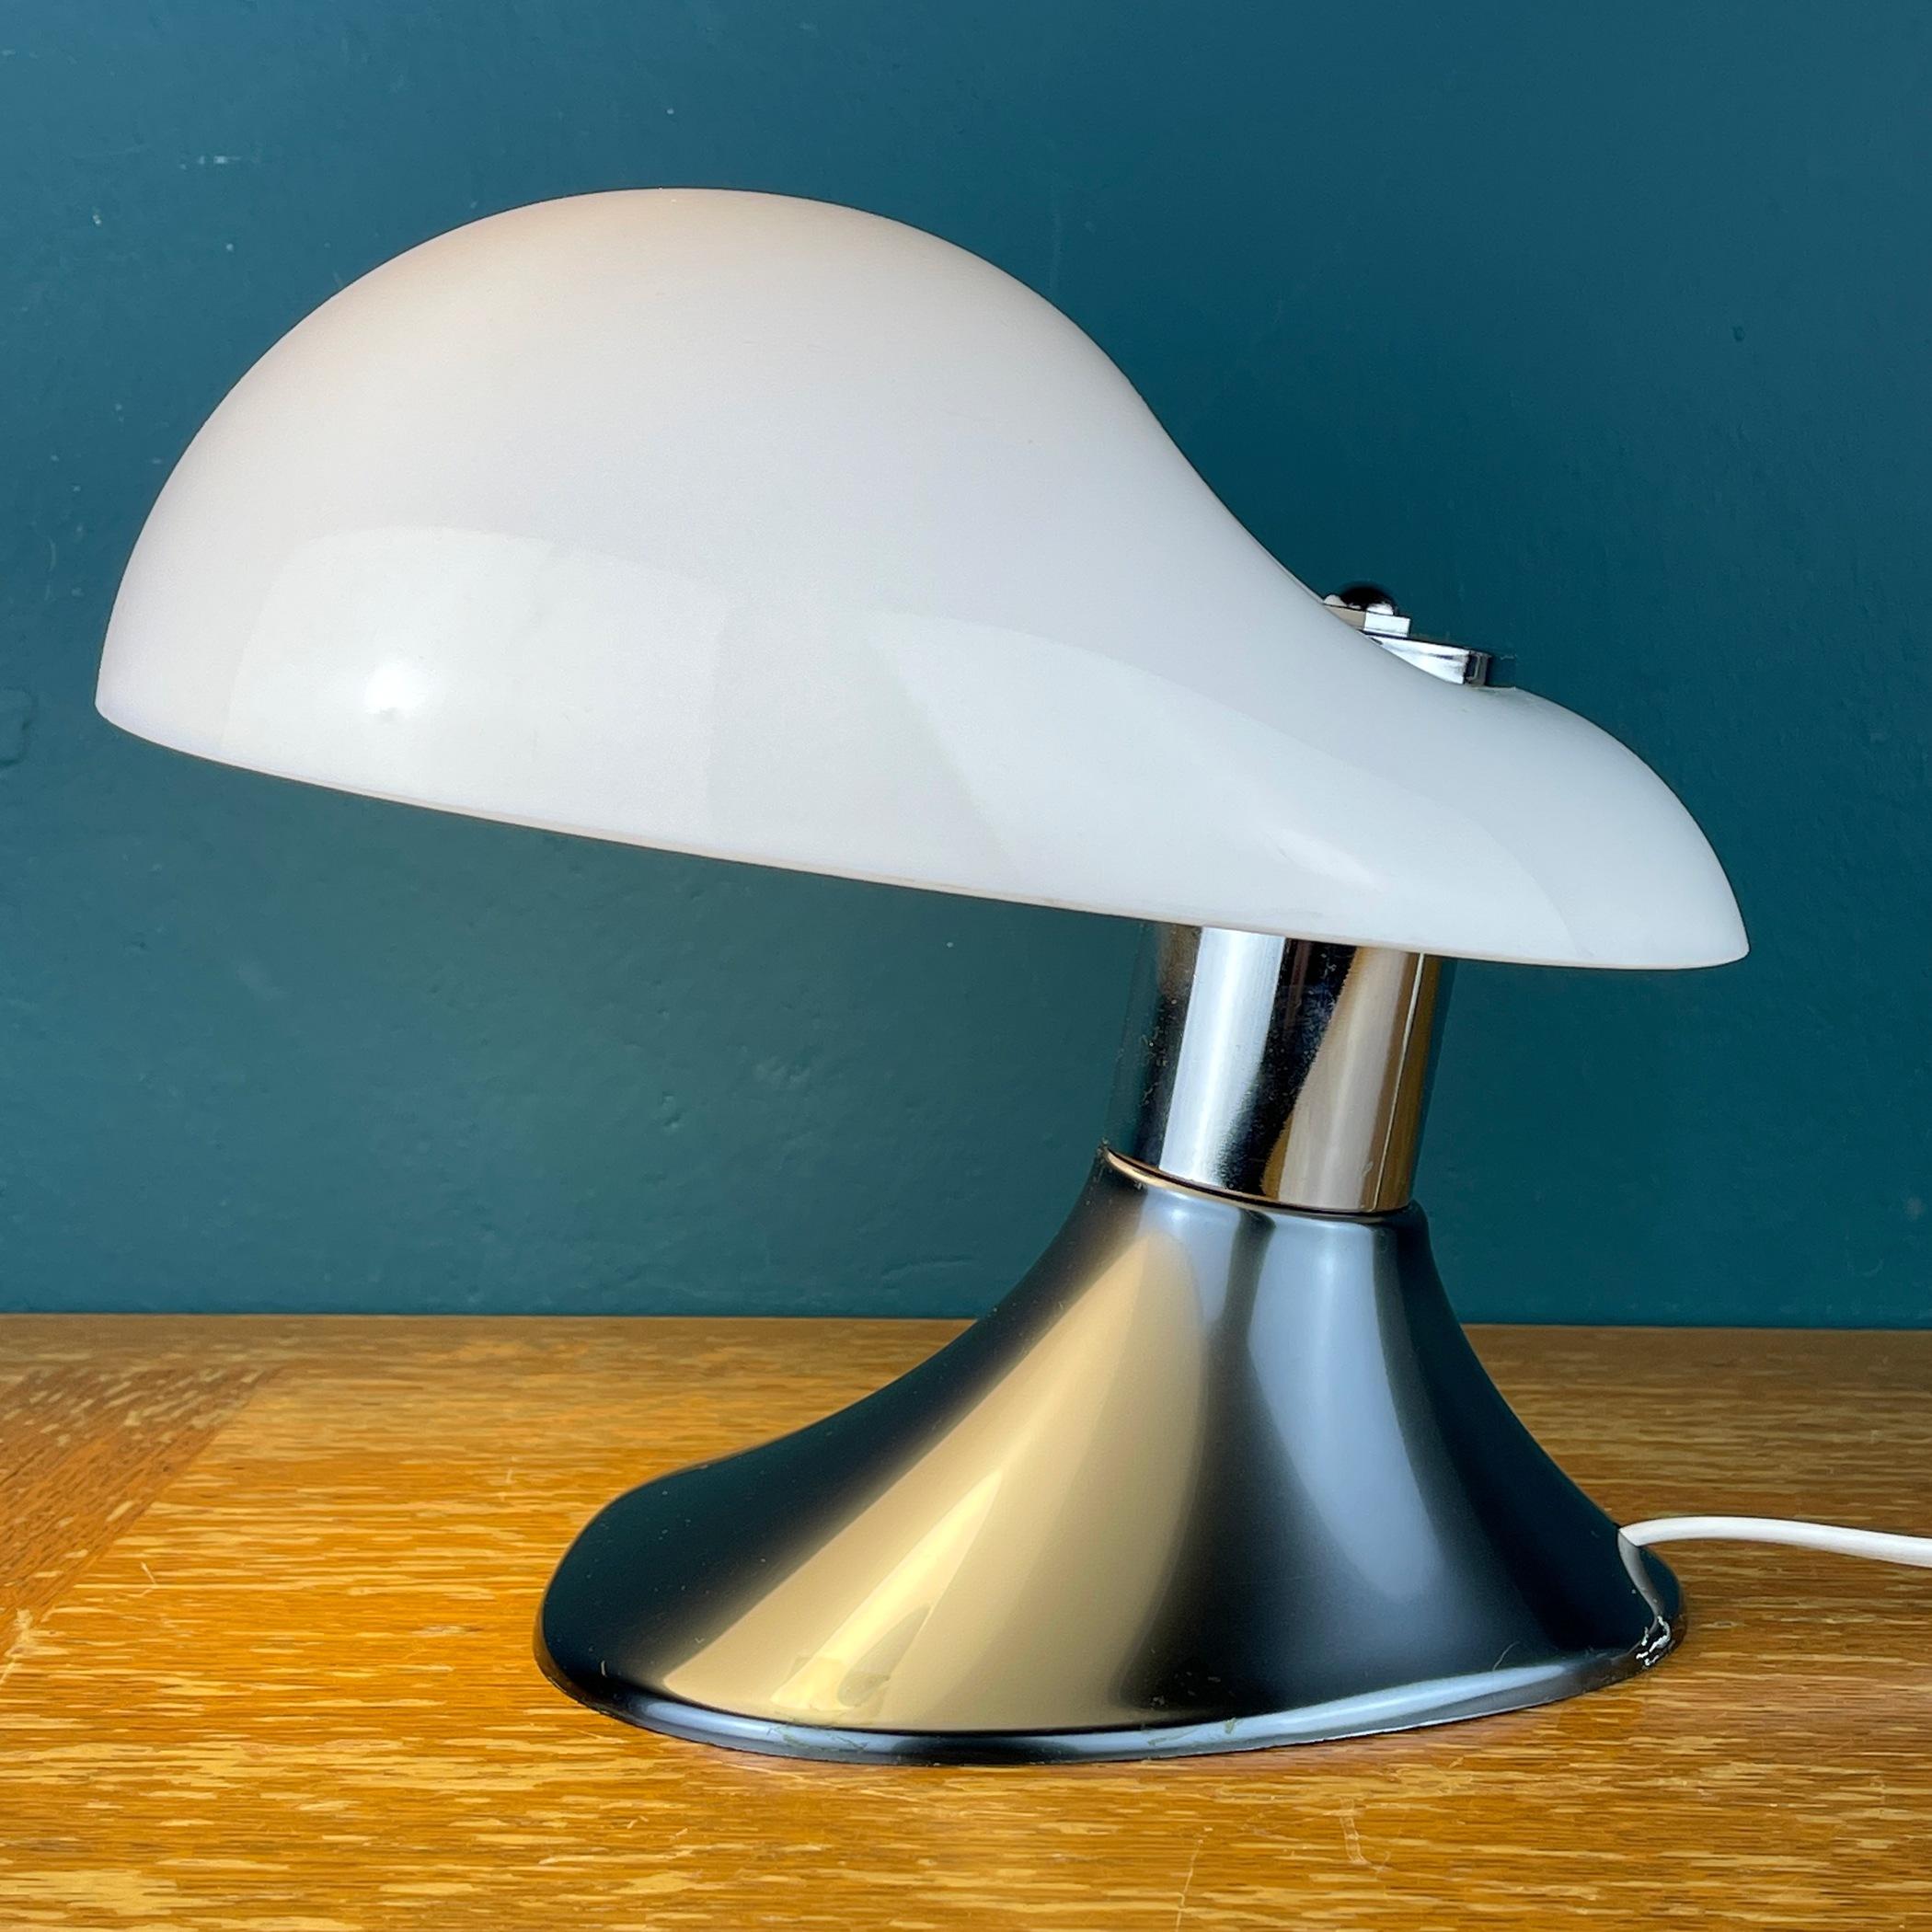 The beautiful table lamp Cobra designed by Harvey Guzzini and manufactured by Guzzini in Italy around 1960. The piece is made of plexiglass, a material that is iconic for Guzzini’s style and represents mid-century Italian design perfectly. The